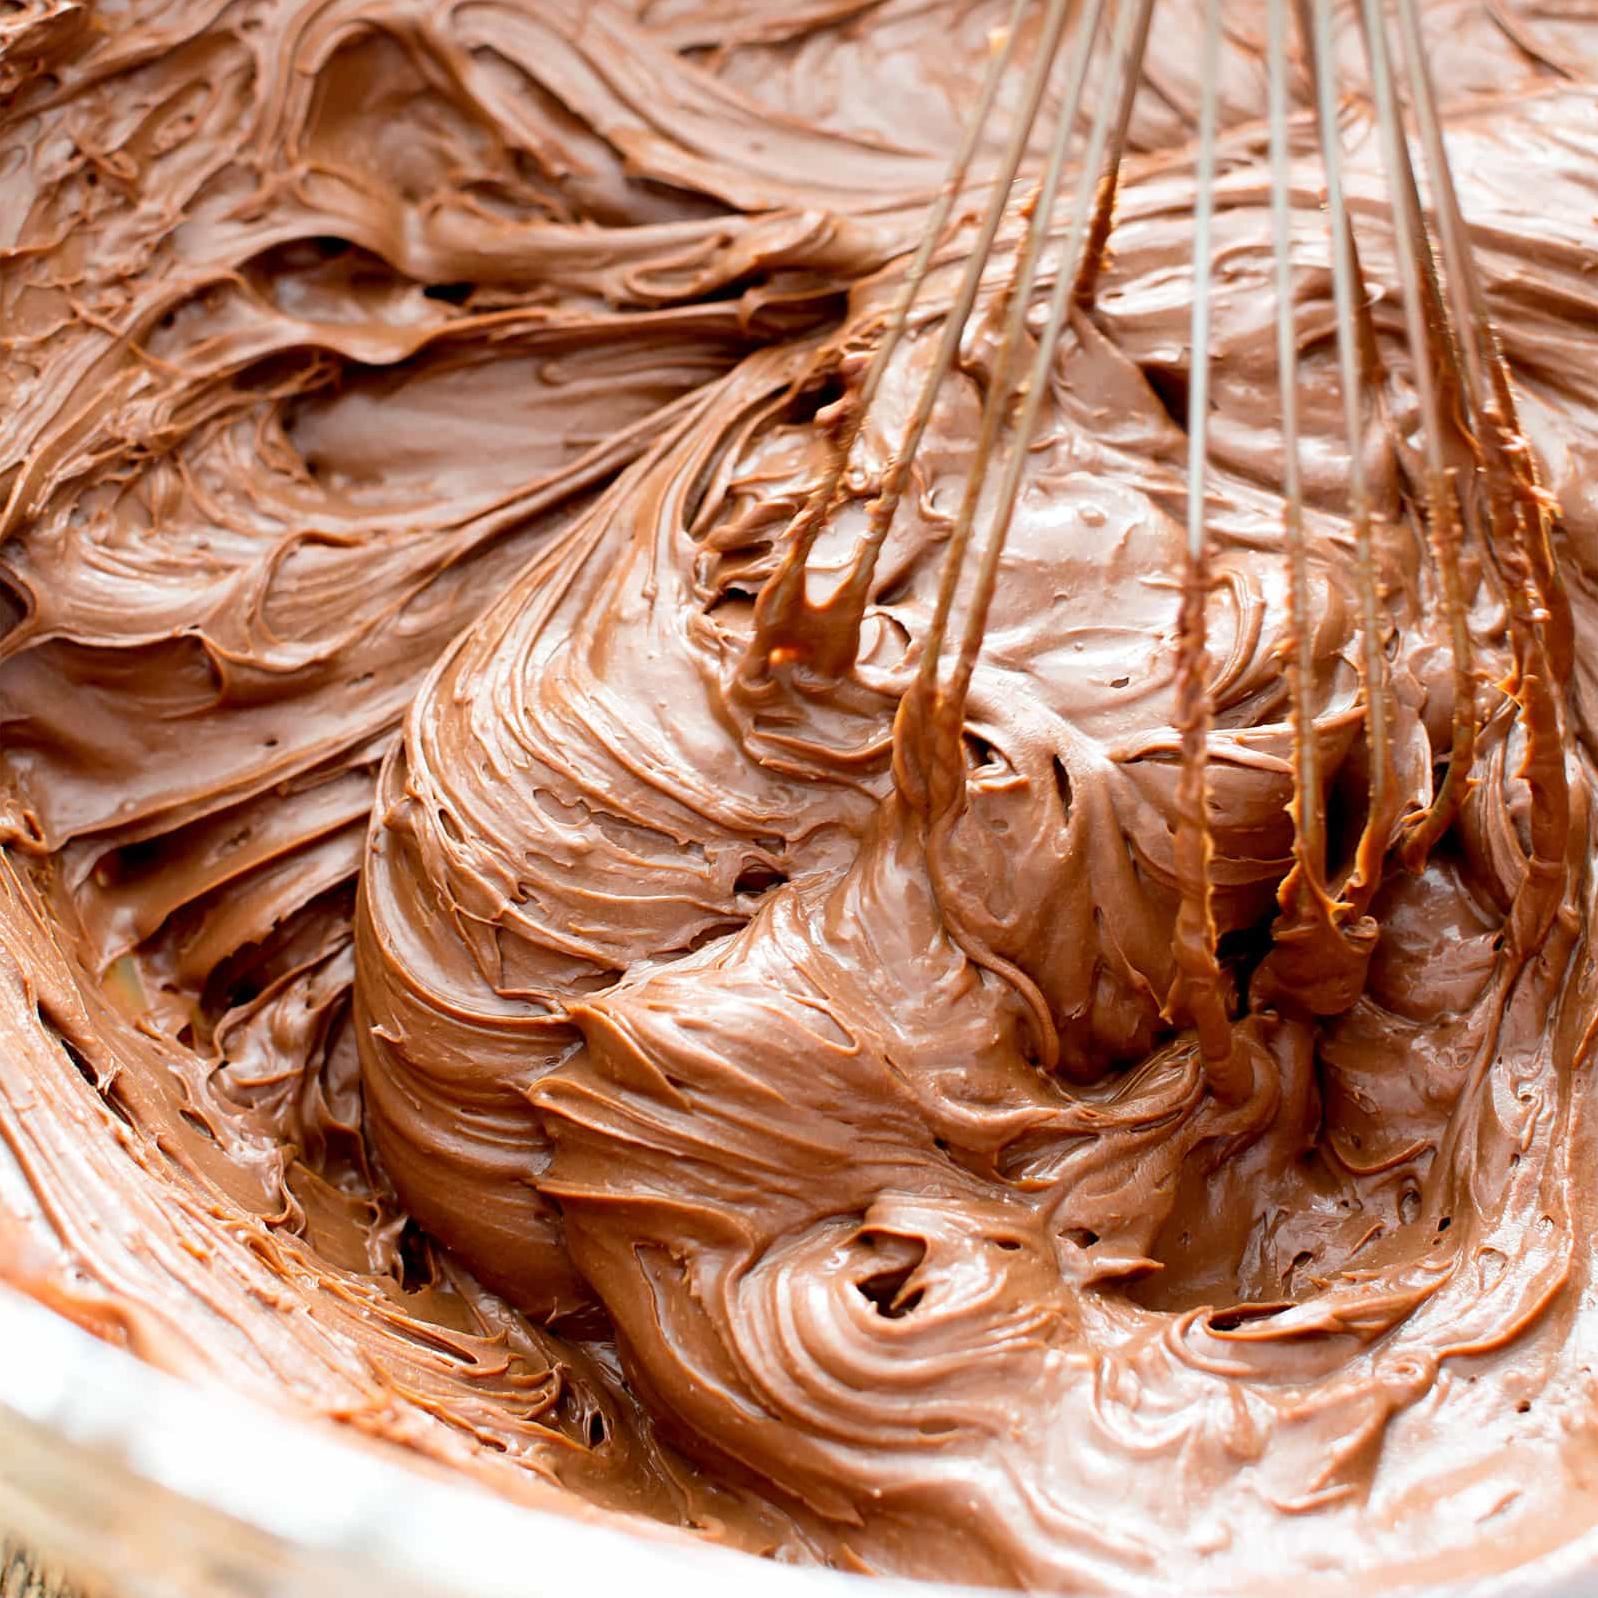  Your taste buds will thank you for this amazing vegan chocolate frosting!